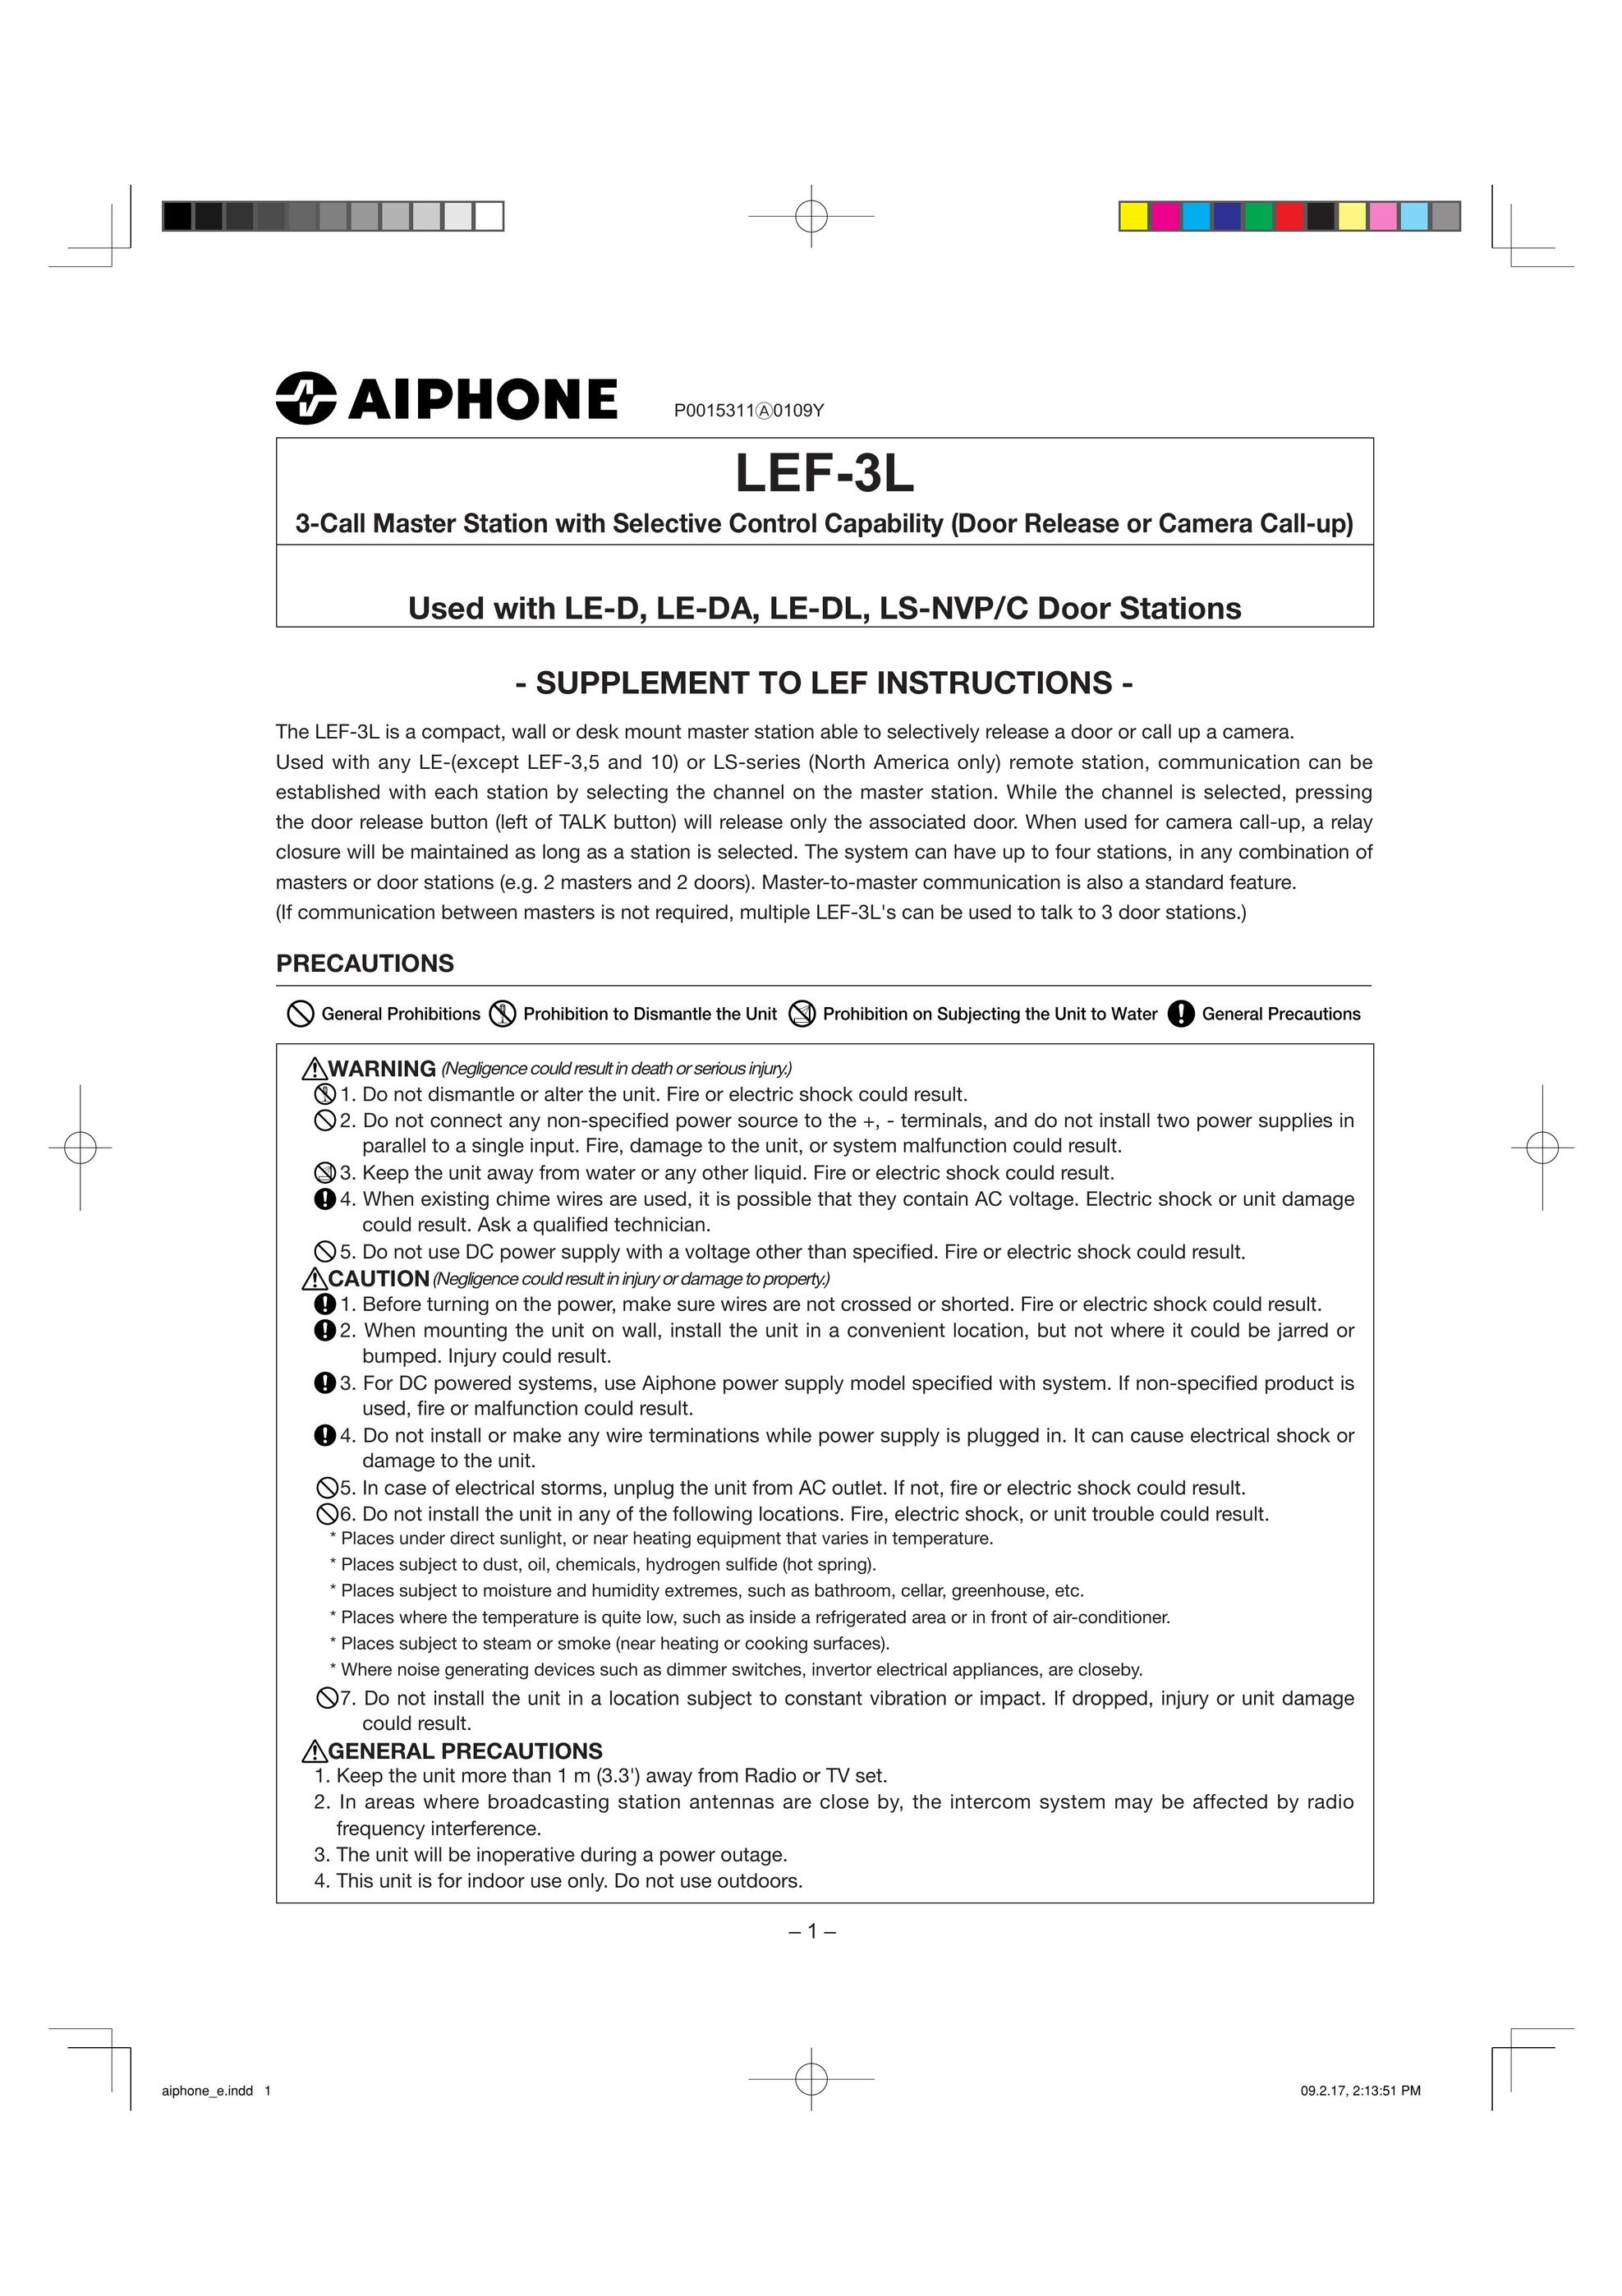 Aiphone LEF-3L Safety Gate User Manual